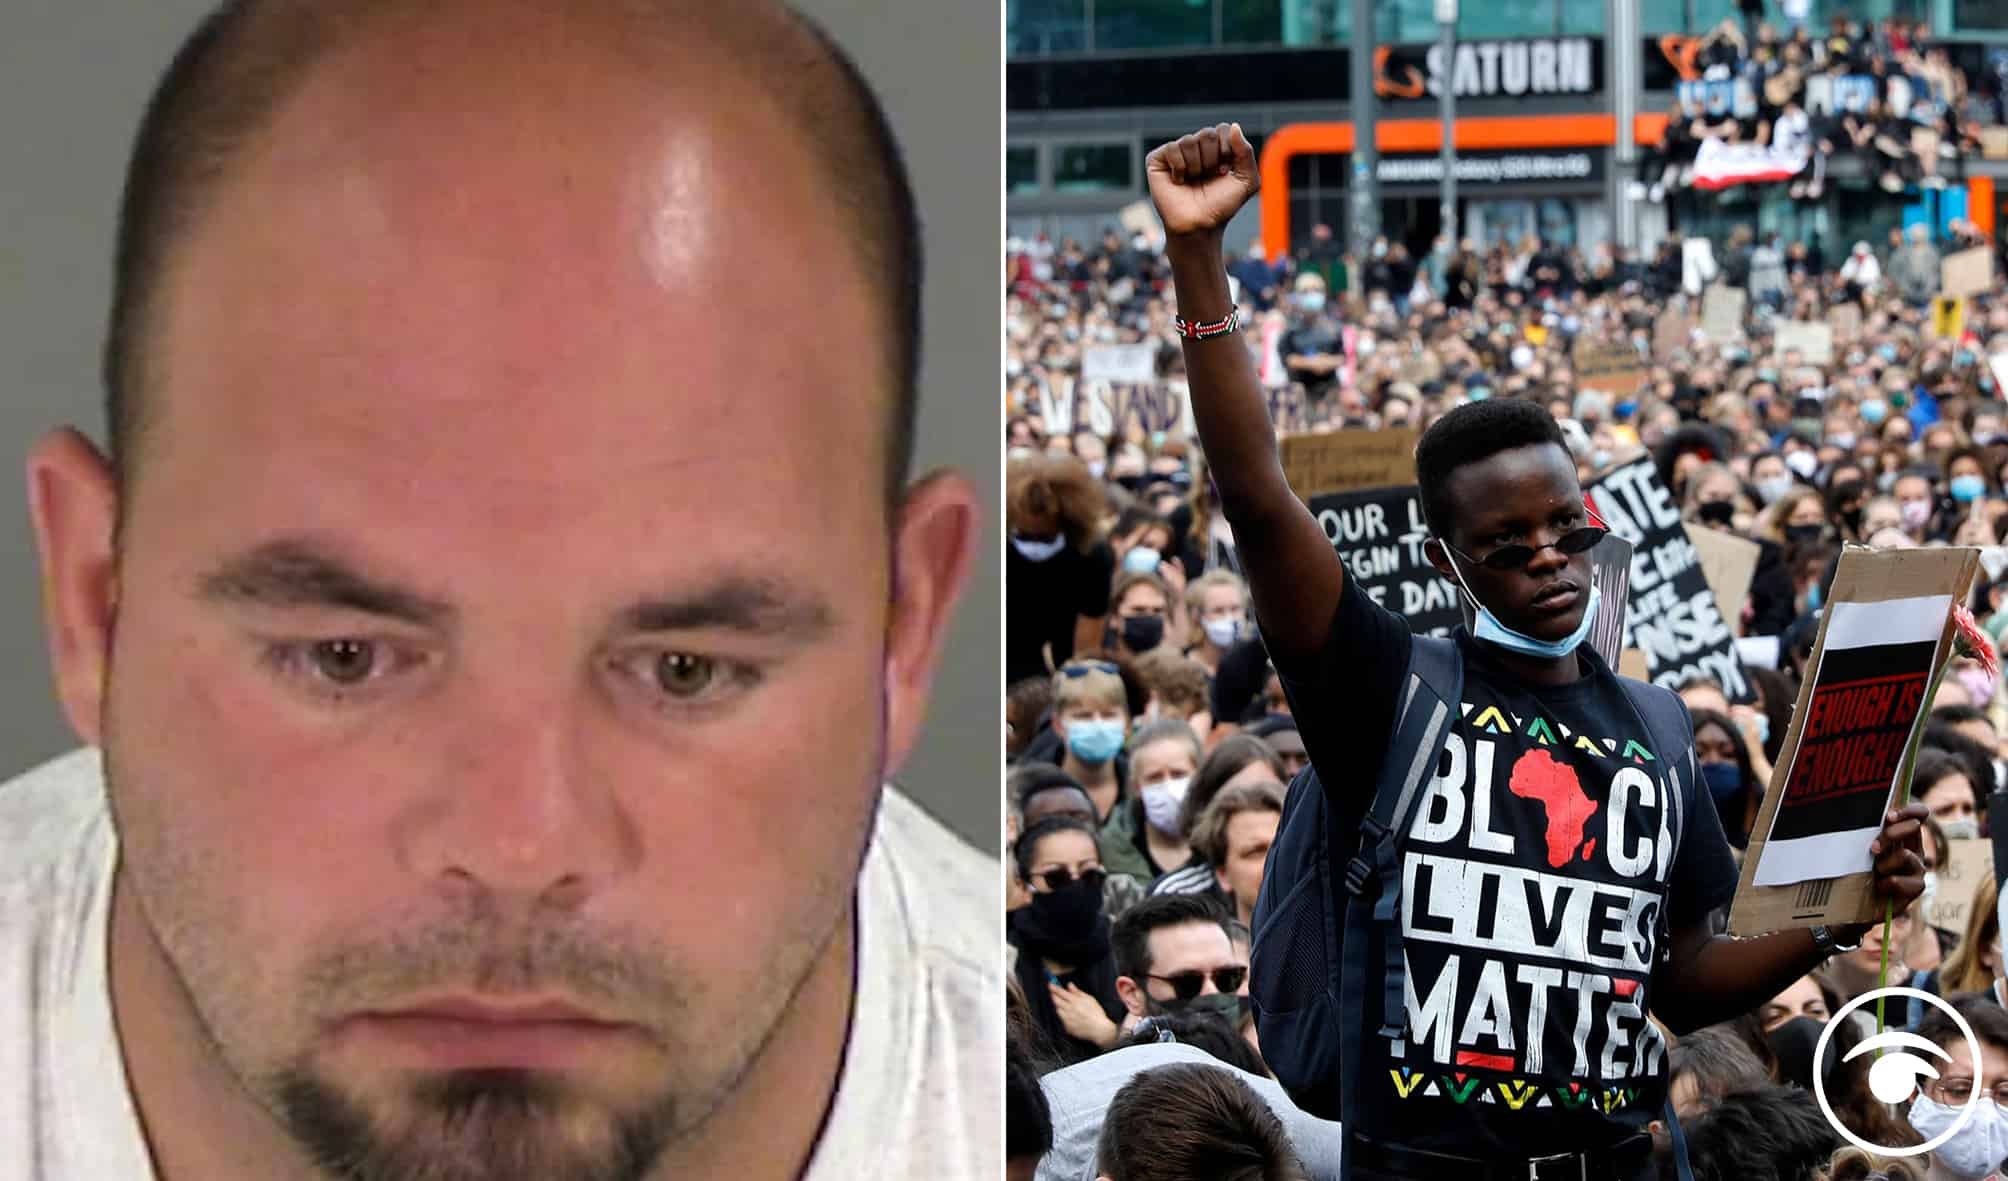 KKK member jailed for driving into BLM protesters he called ‘cockroaches’